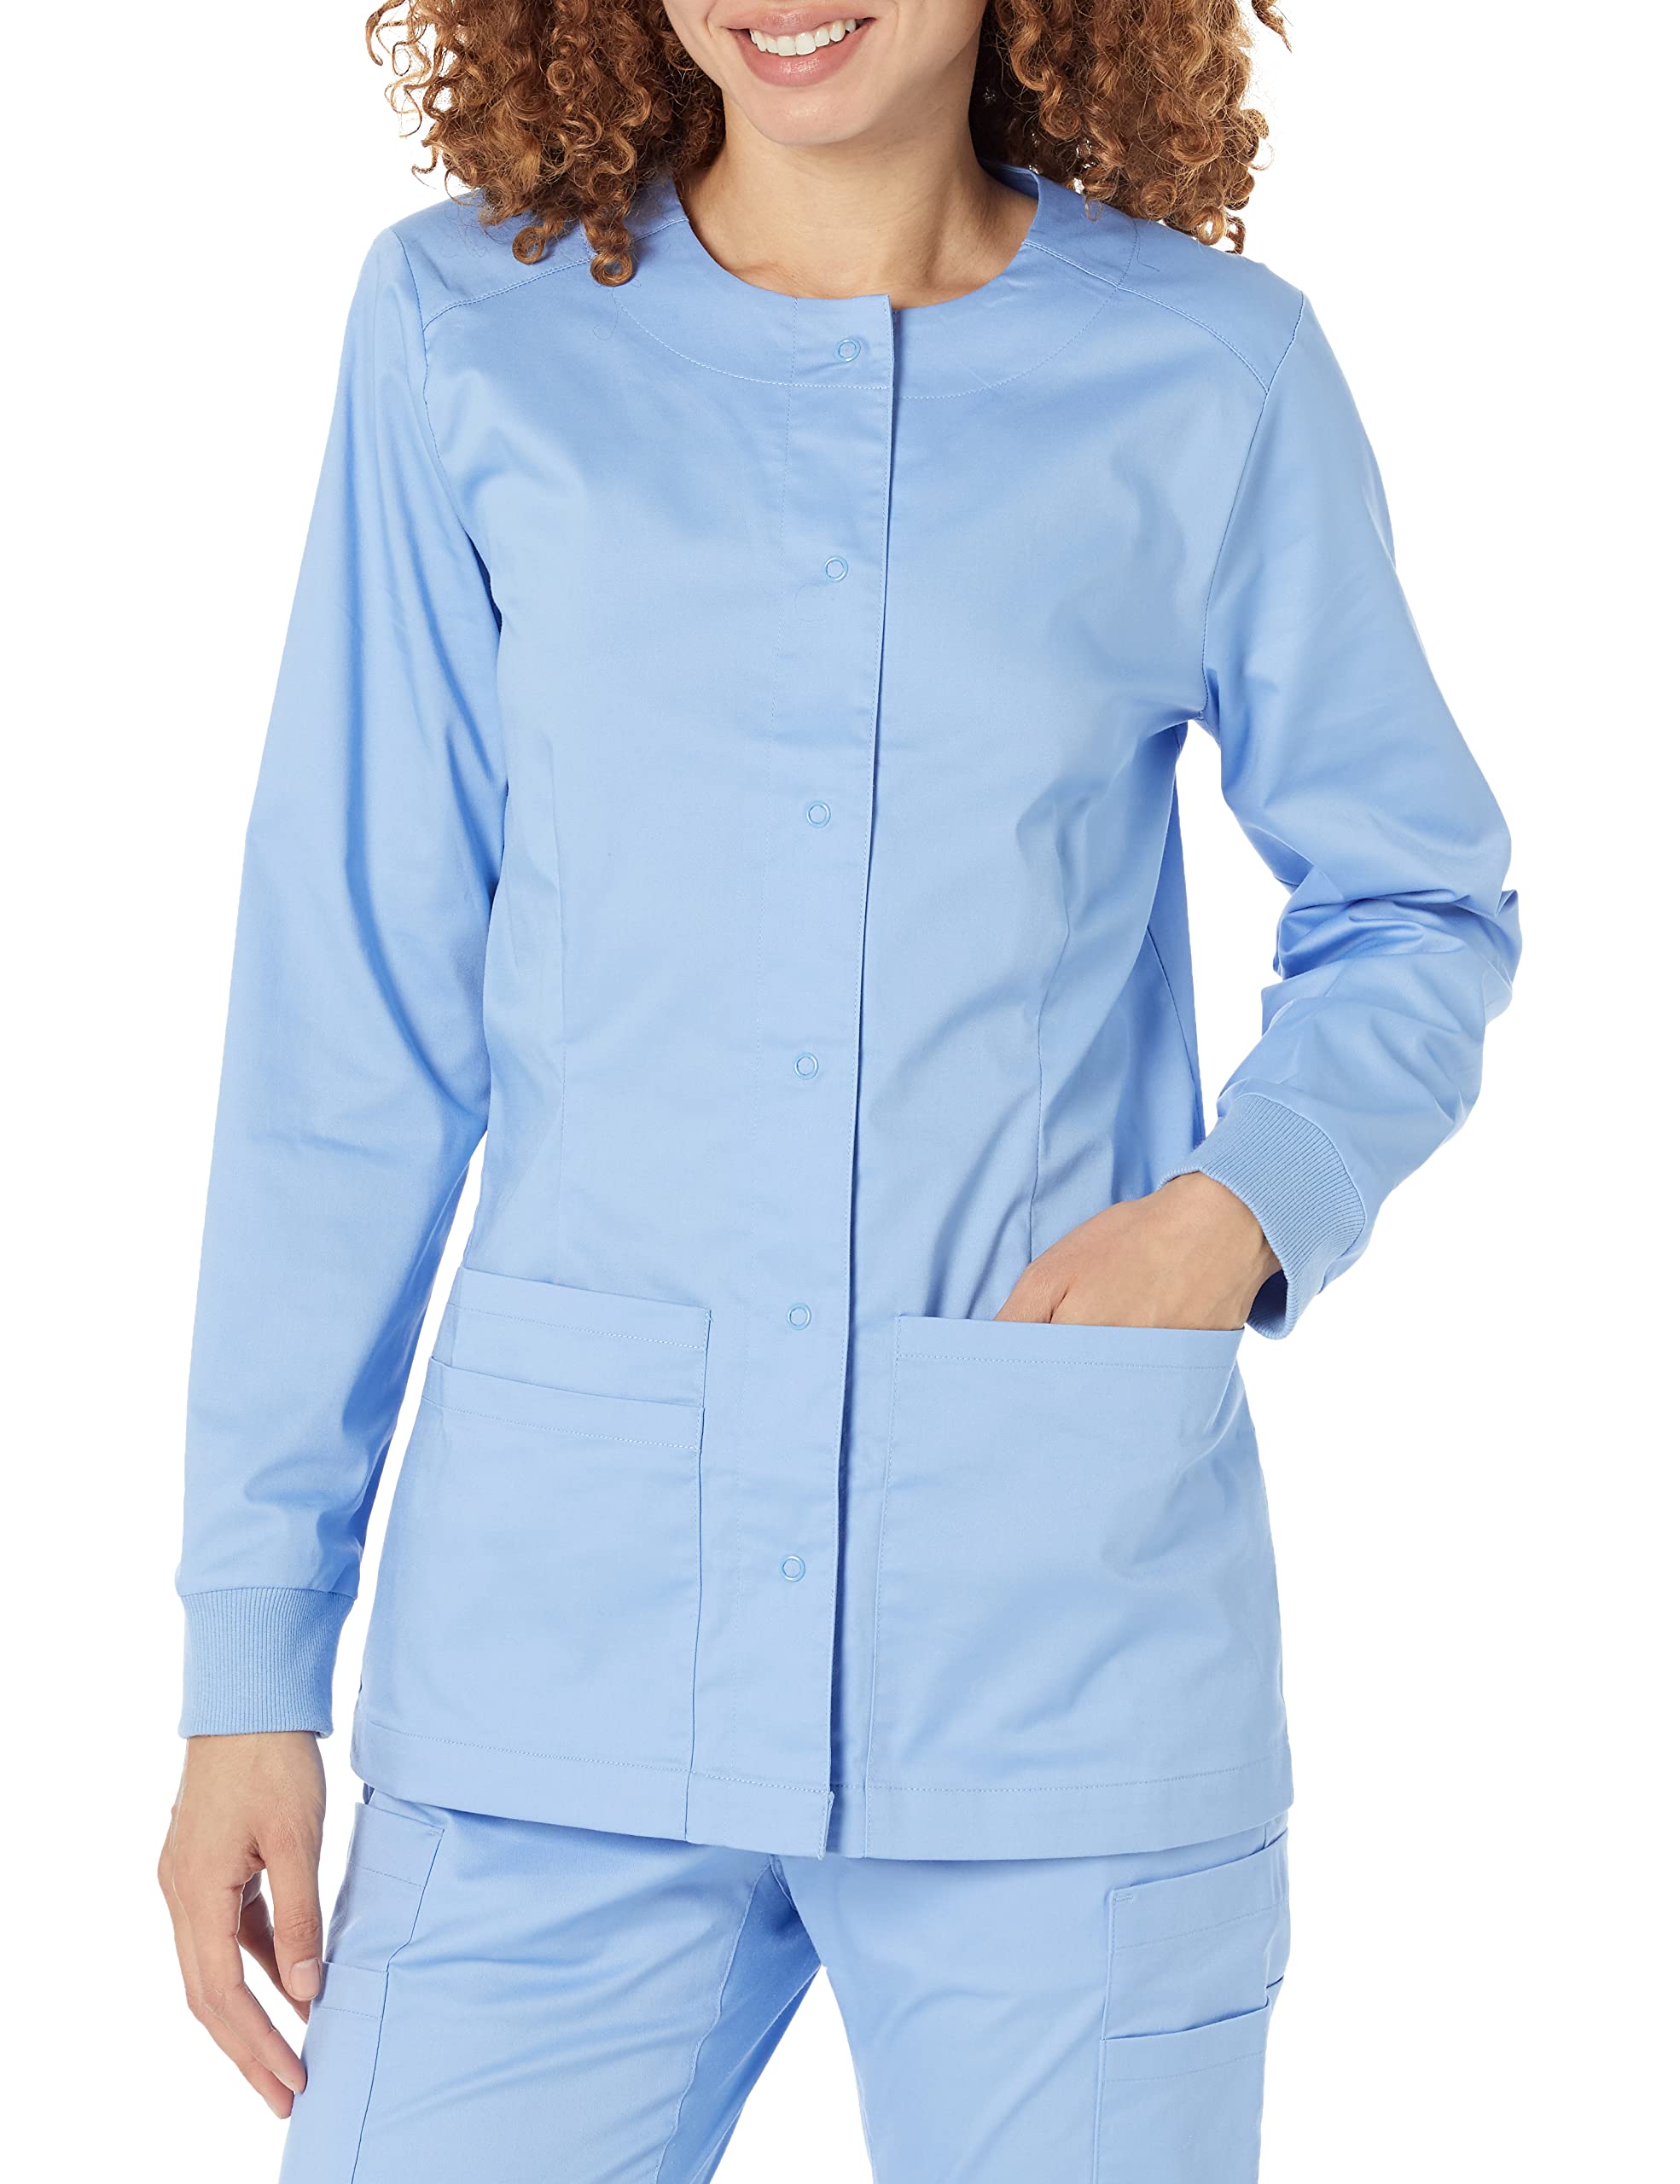 Amazon Essentials Women's Scrub Snap Jacket (Available in Plus Size)